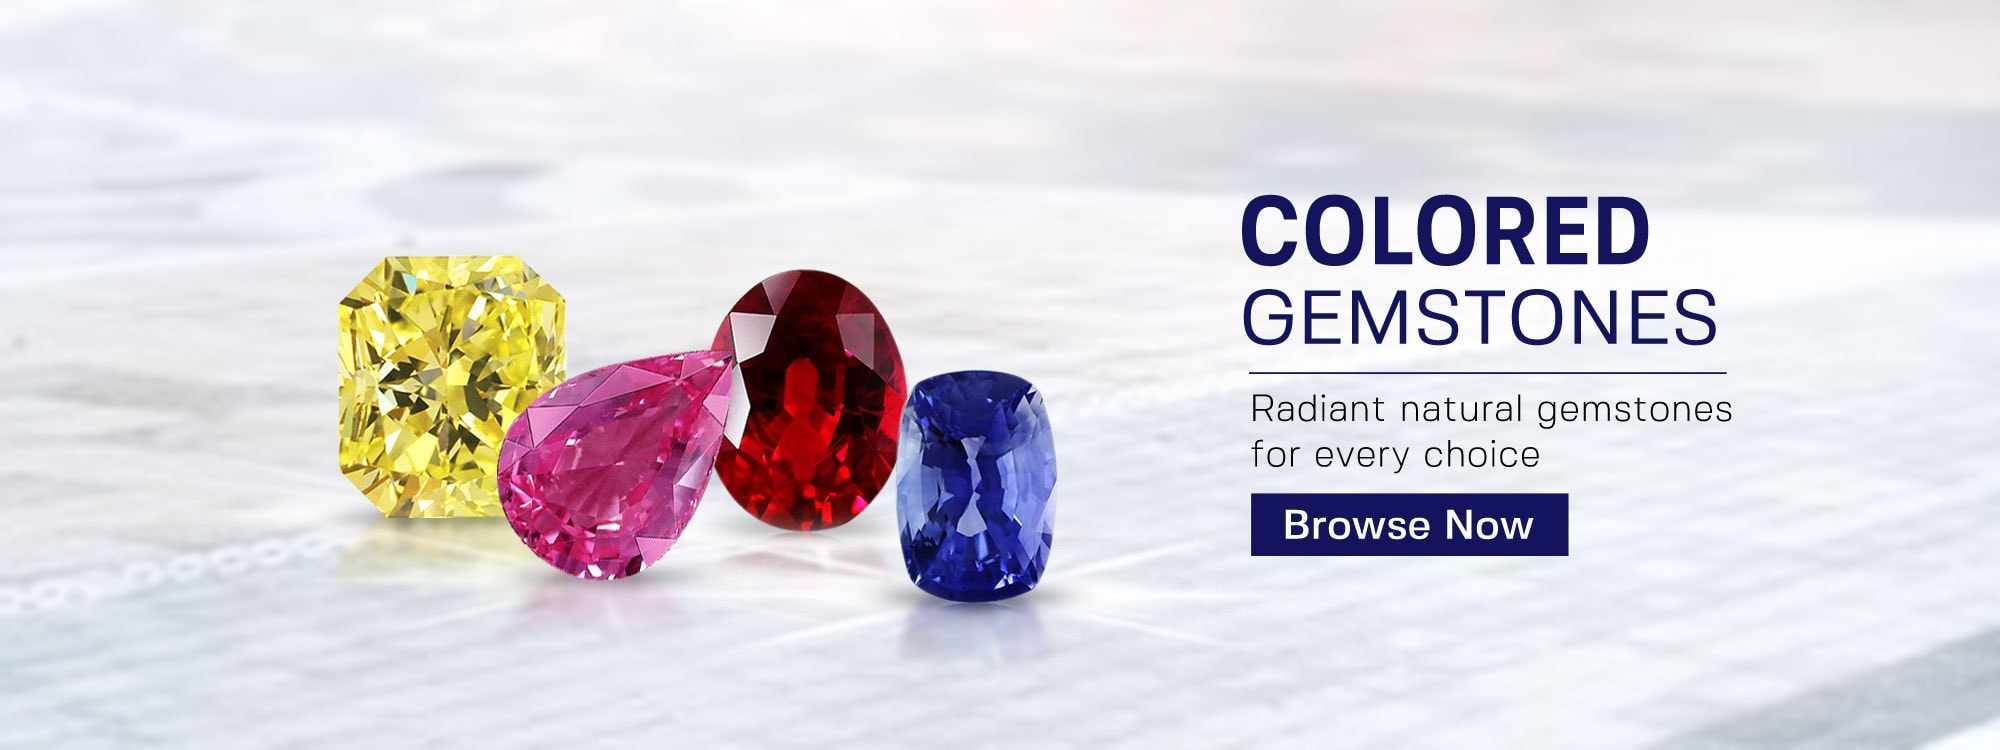 colored gemstone selection at gemco international inc.